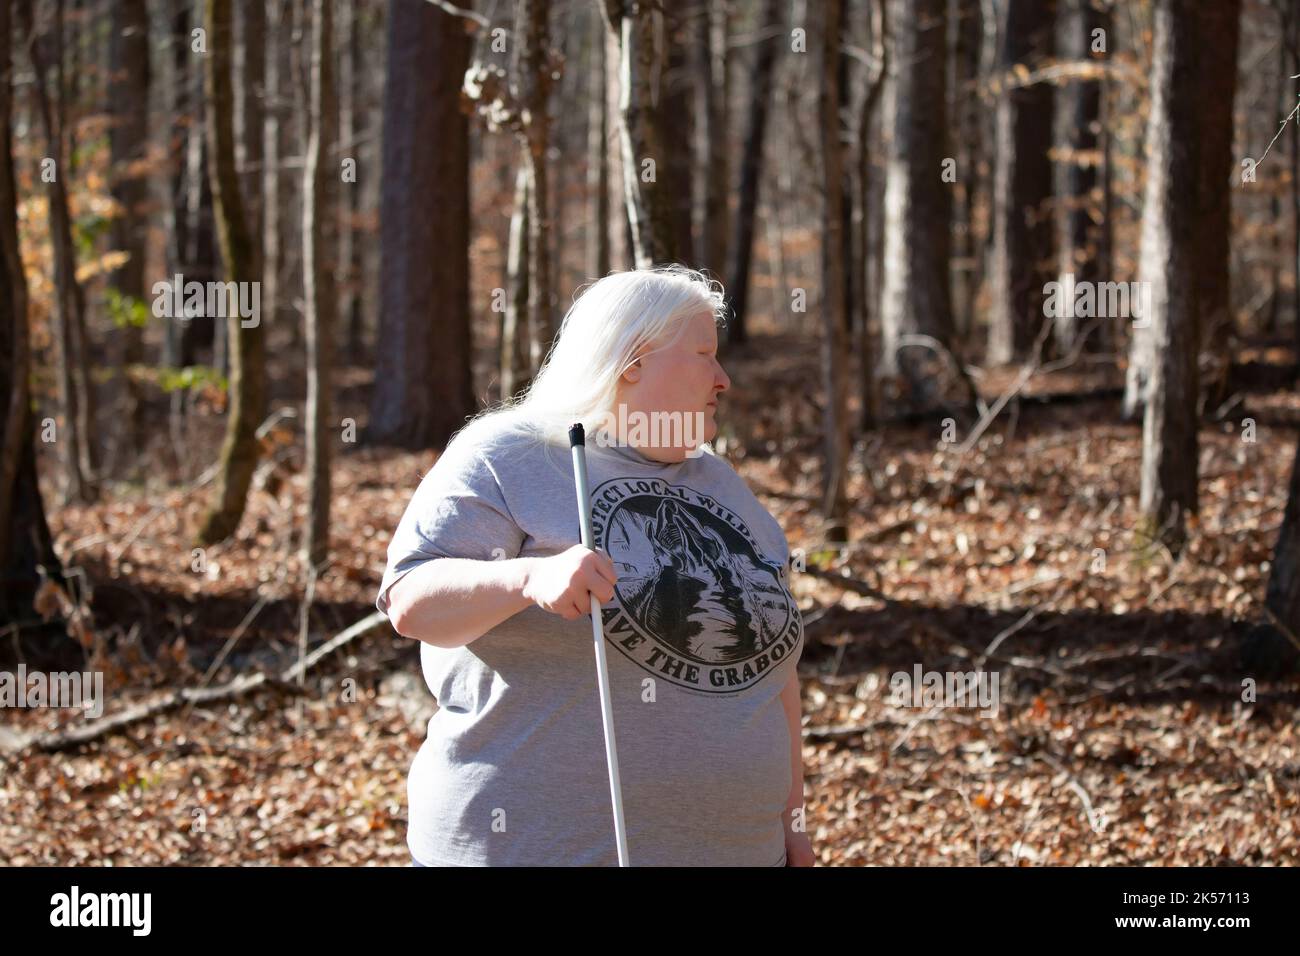 BLIND WOMAN ENJOYING A WOODED PARK, LOUISIANA/USA – FEBRUARY 19 2022: Blind woman looking around upset in a wooded park Stock Photo